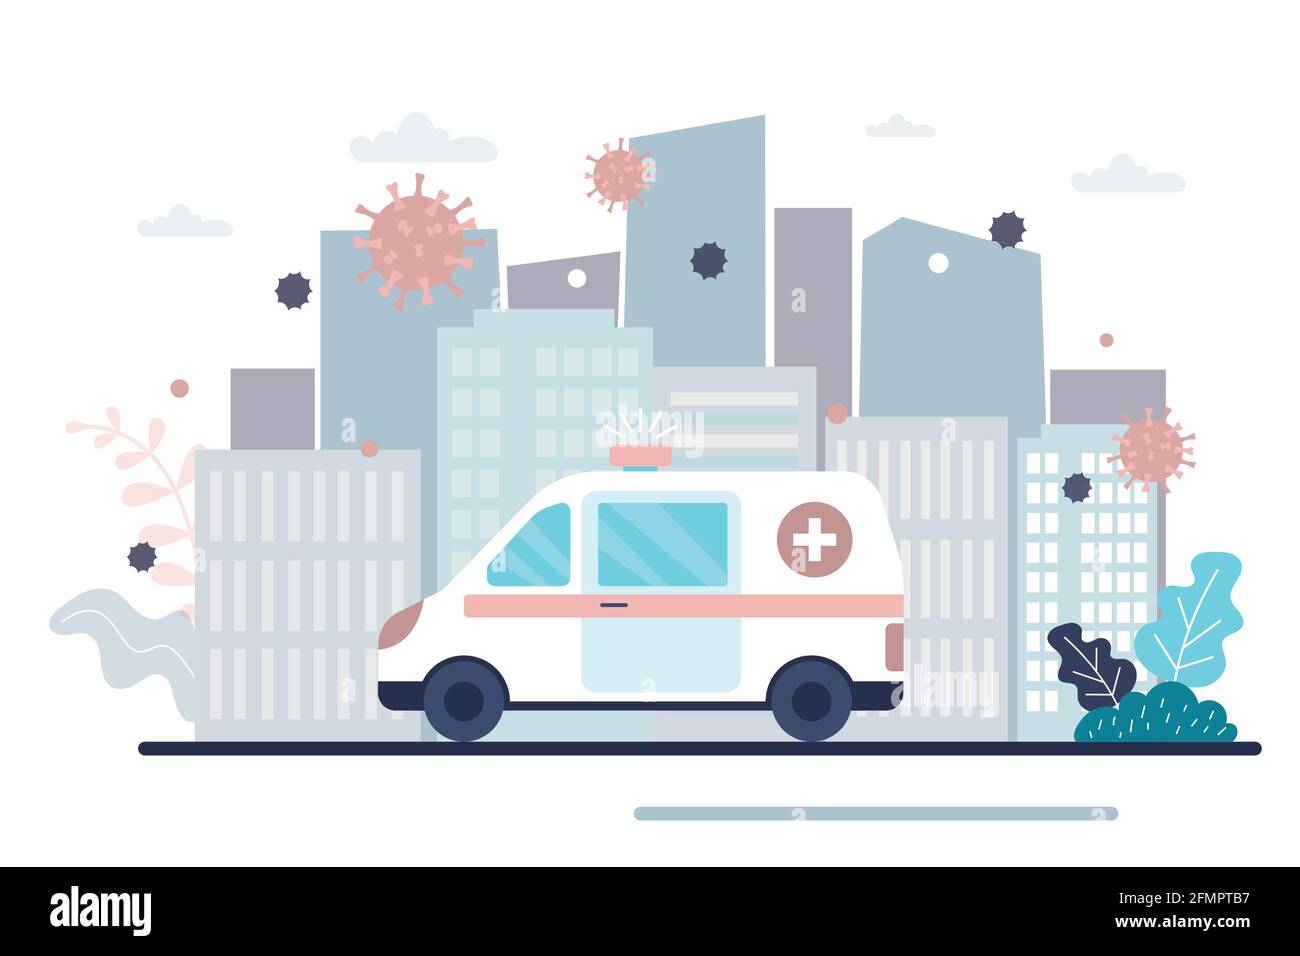 Ambulance van on city road. Doctors stop spread of virus and disease. Health care concept. Global epidemic or pandemic, urban view on background. Flat Stock Vector